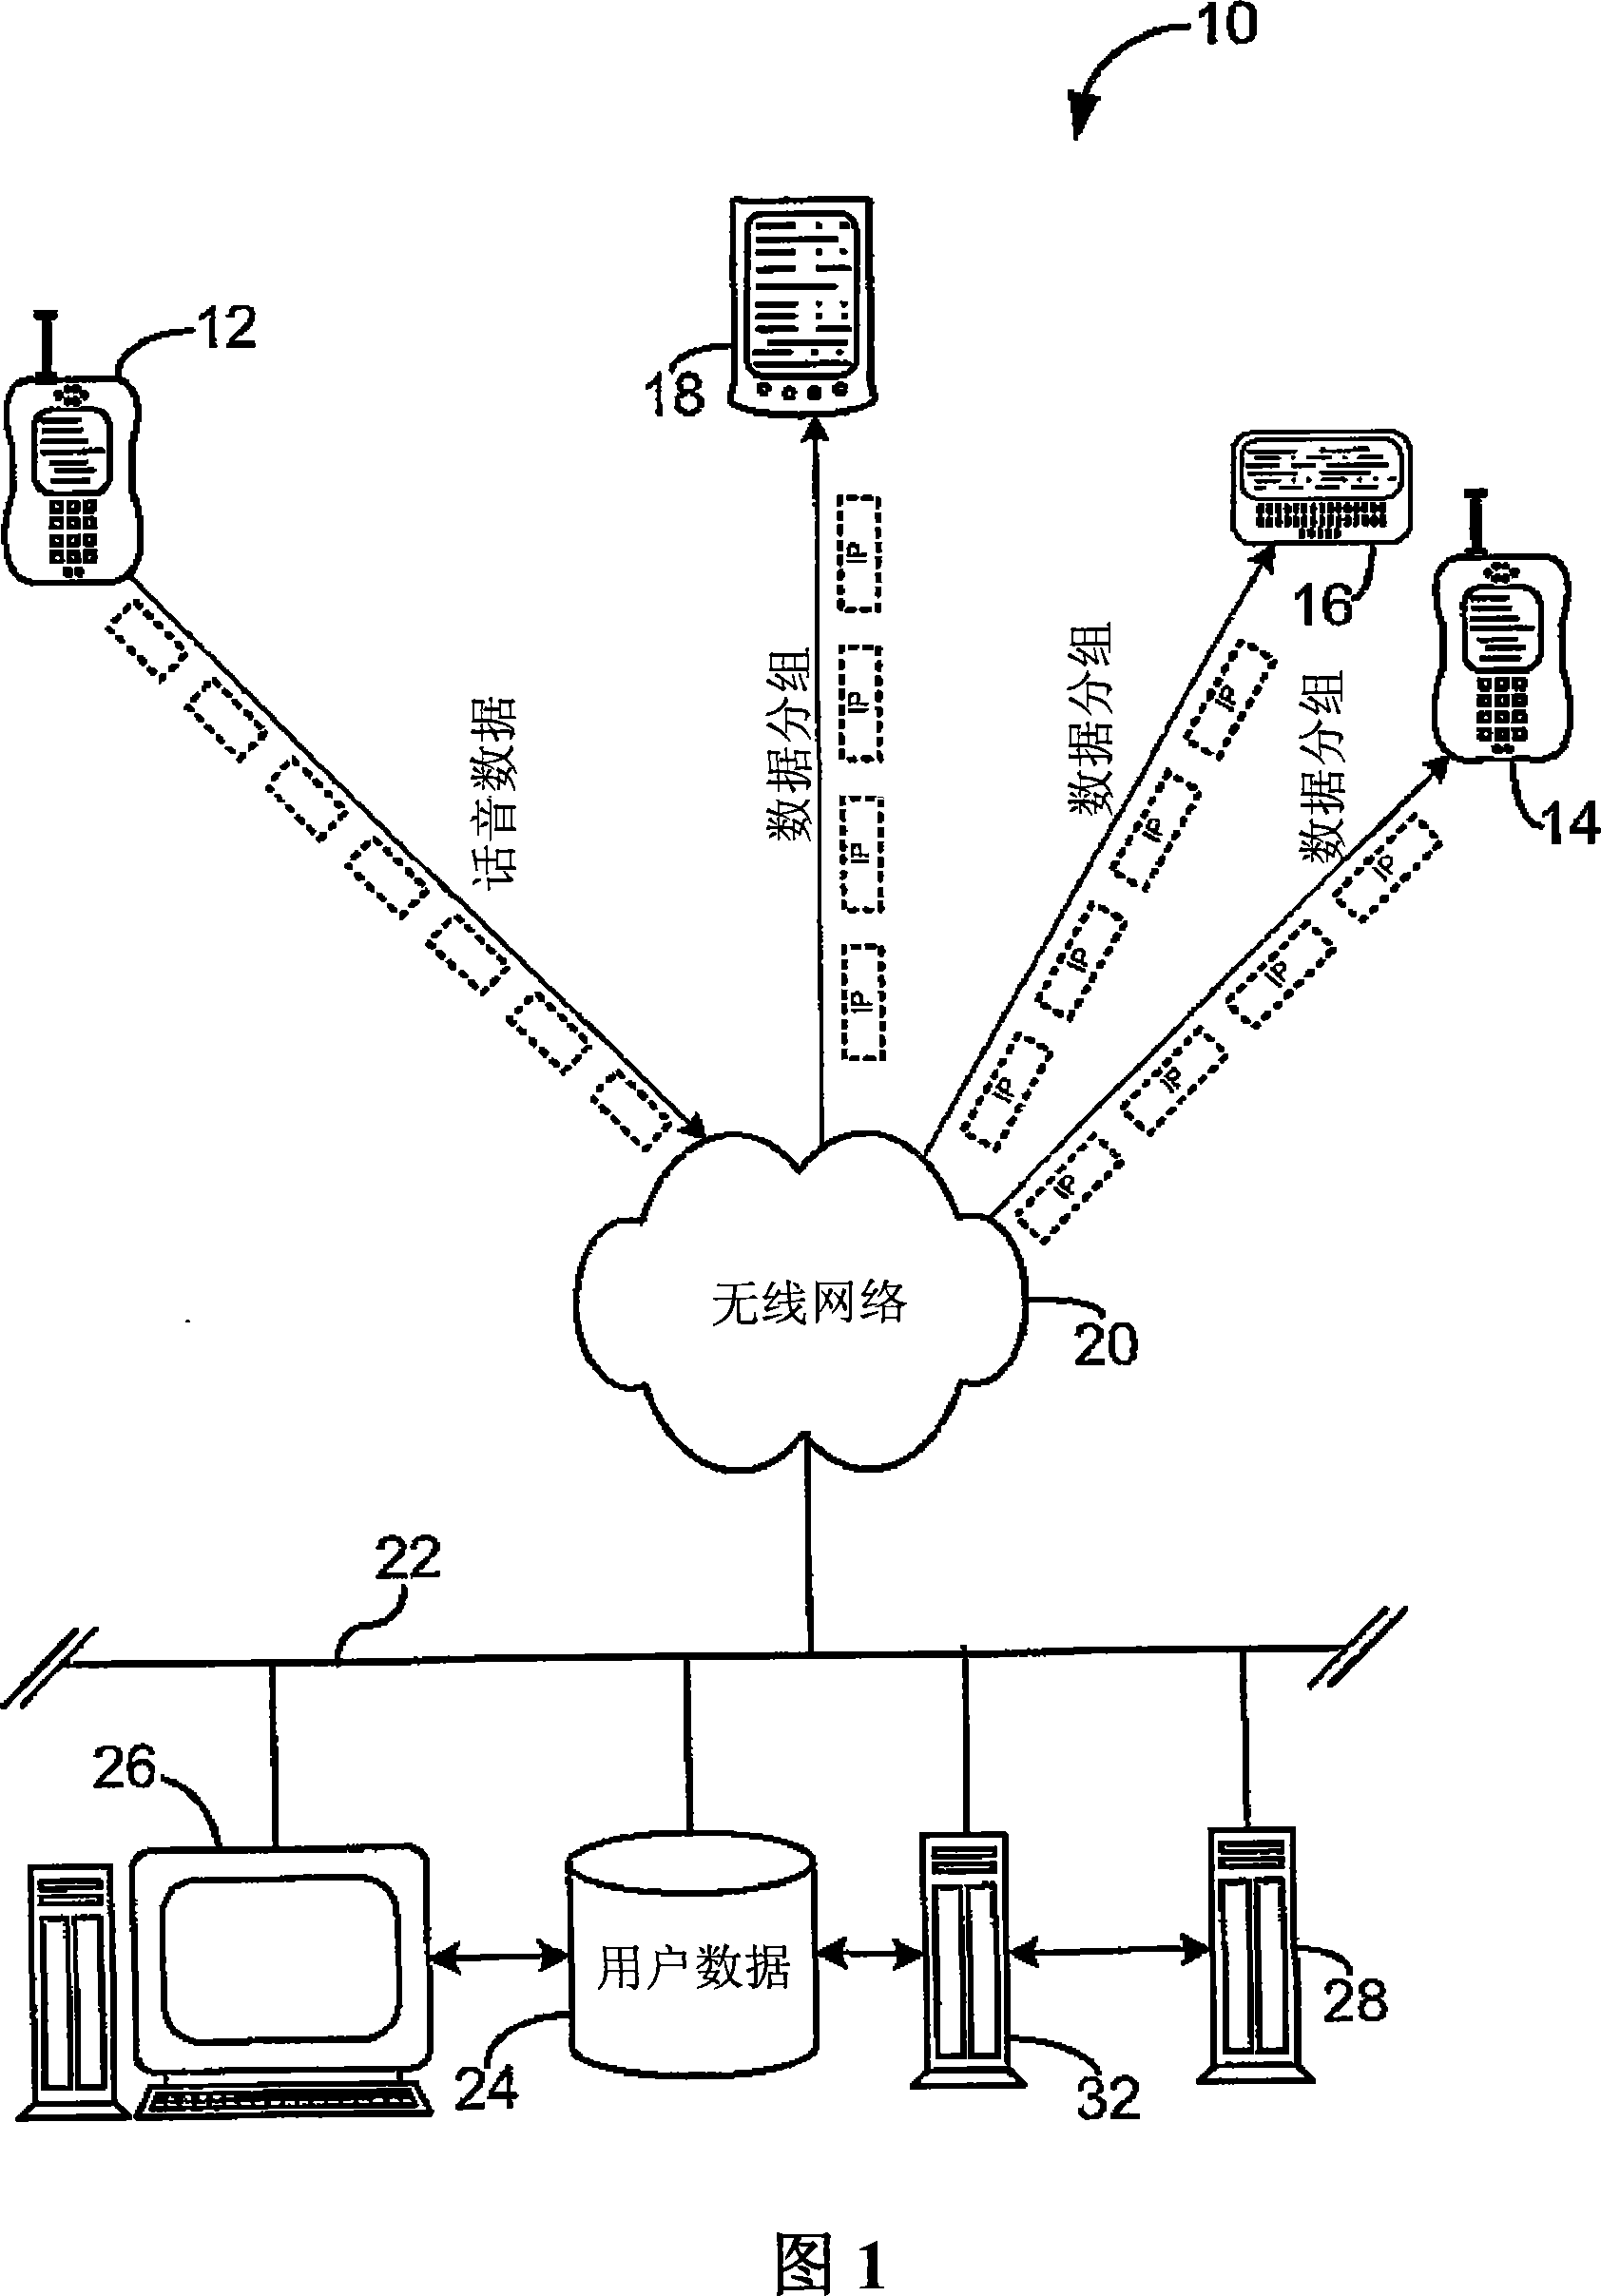 System and method for simultaneous voice and data call over wireless infrastructure